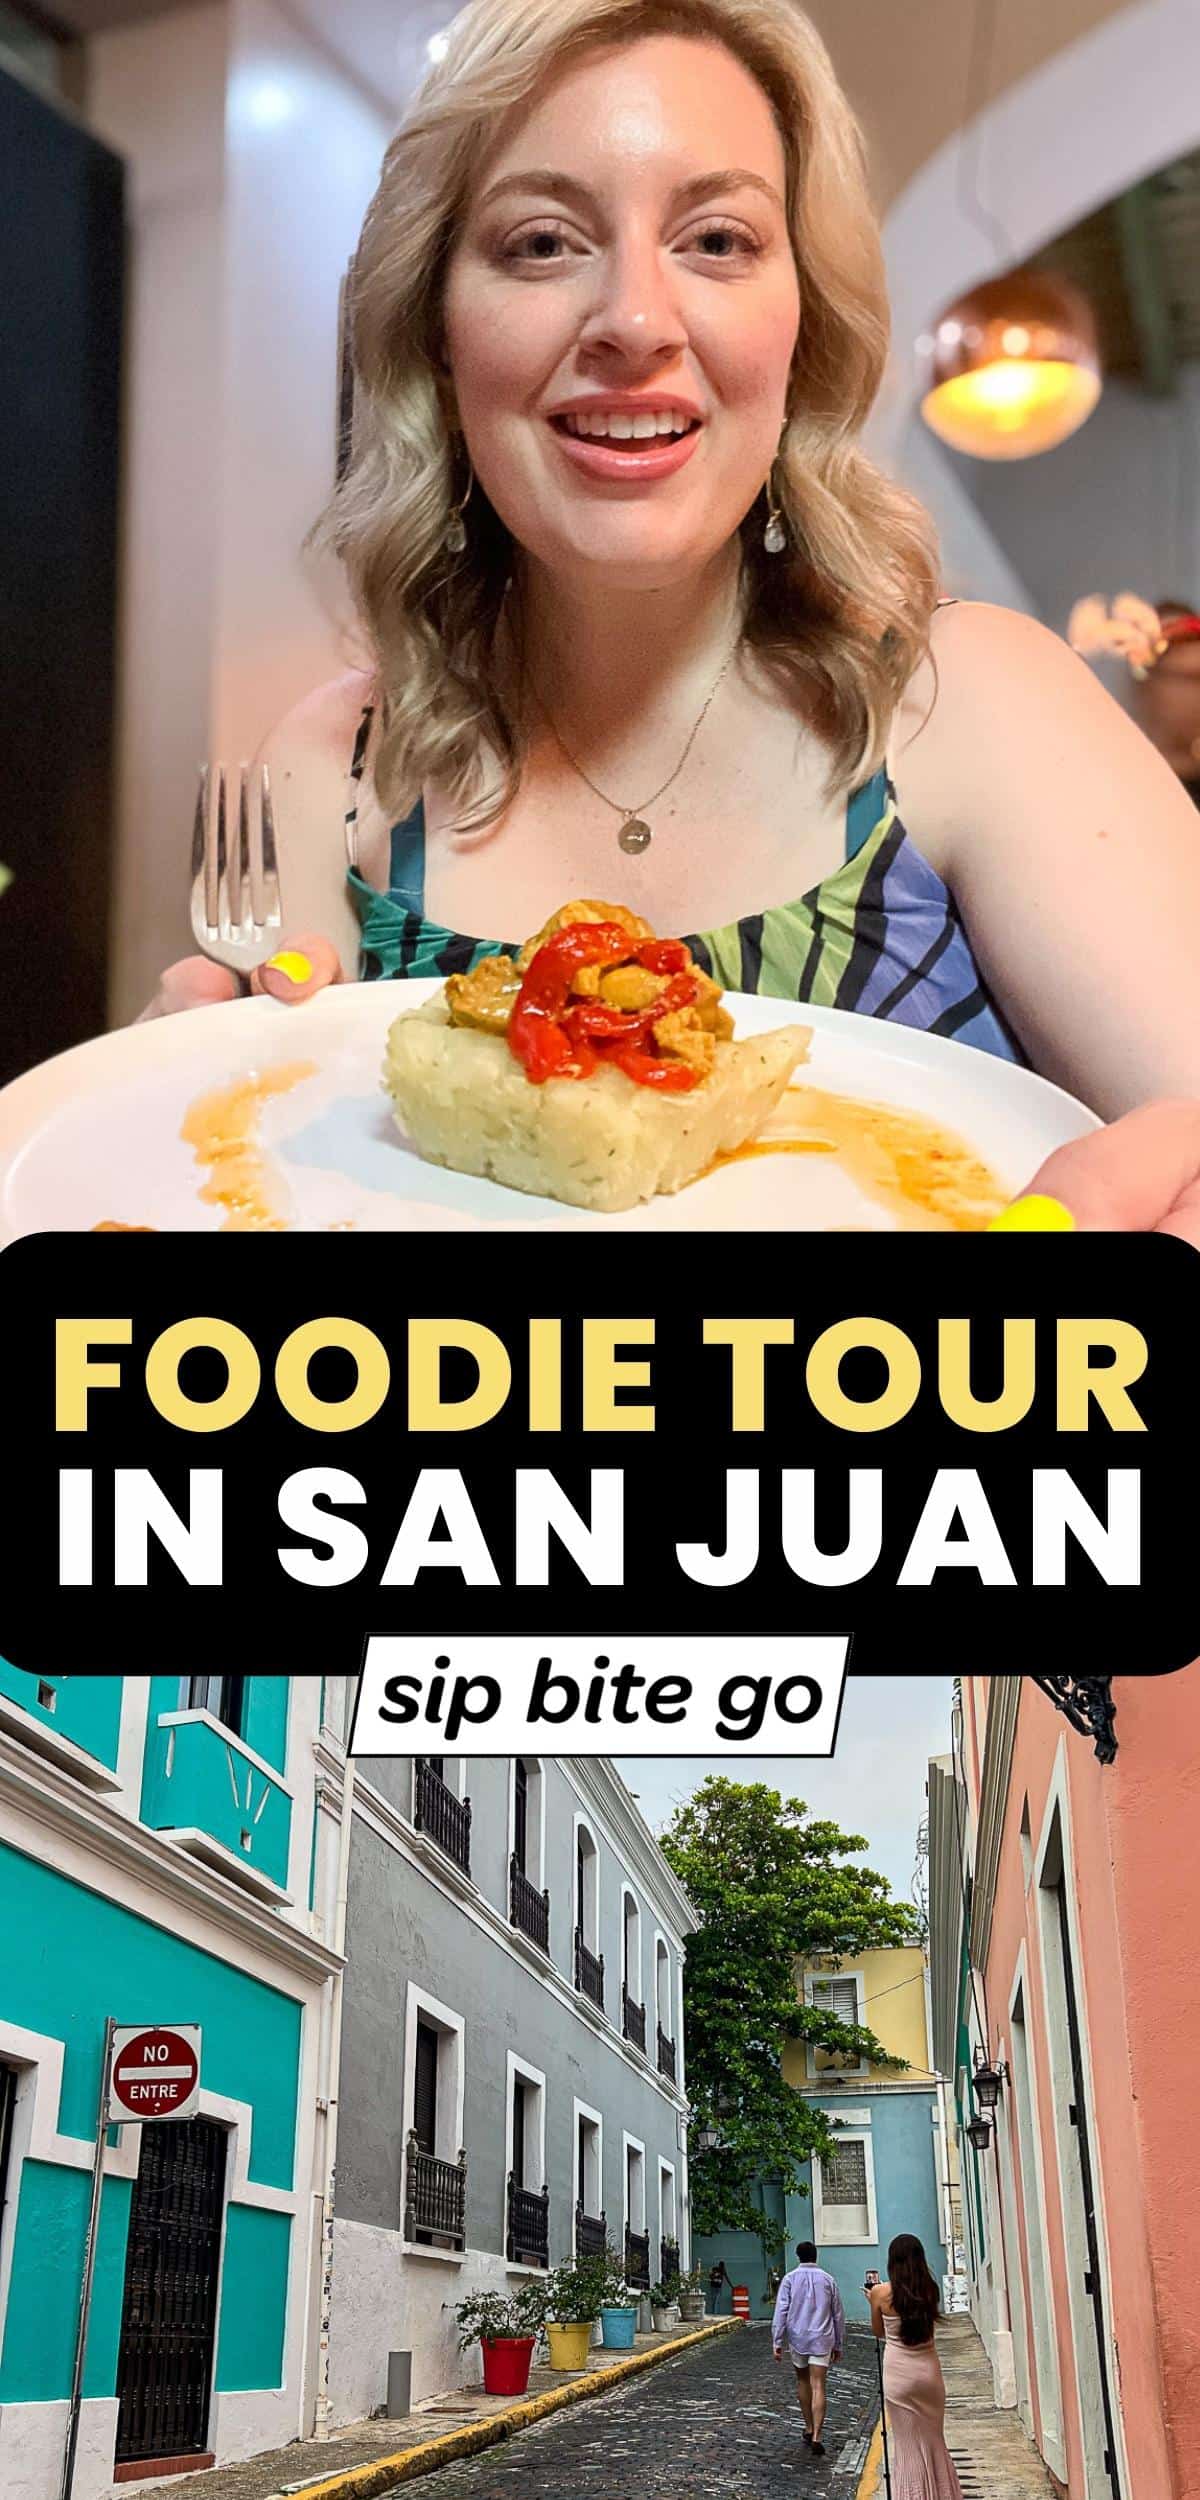 The Spoon Experience Food and Walk Tour Excursion in San Juan Puerto Rico with Jenna Passaro and Sip Bite Go logo